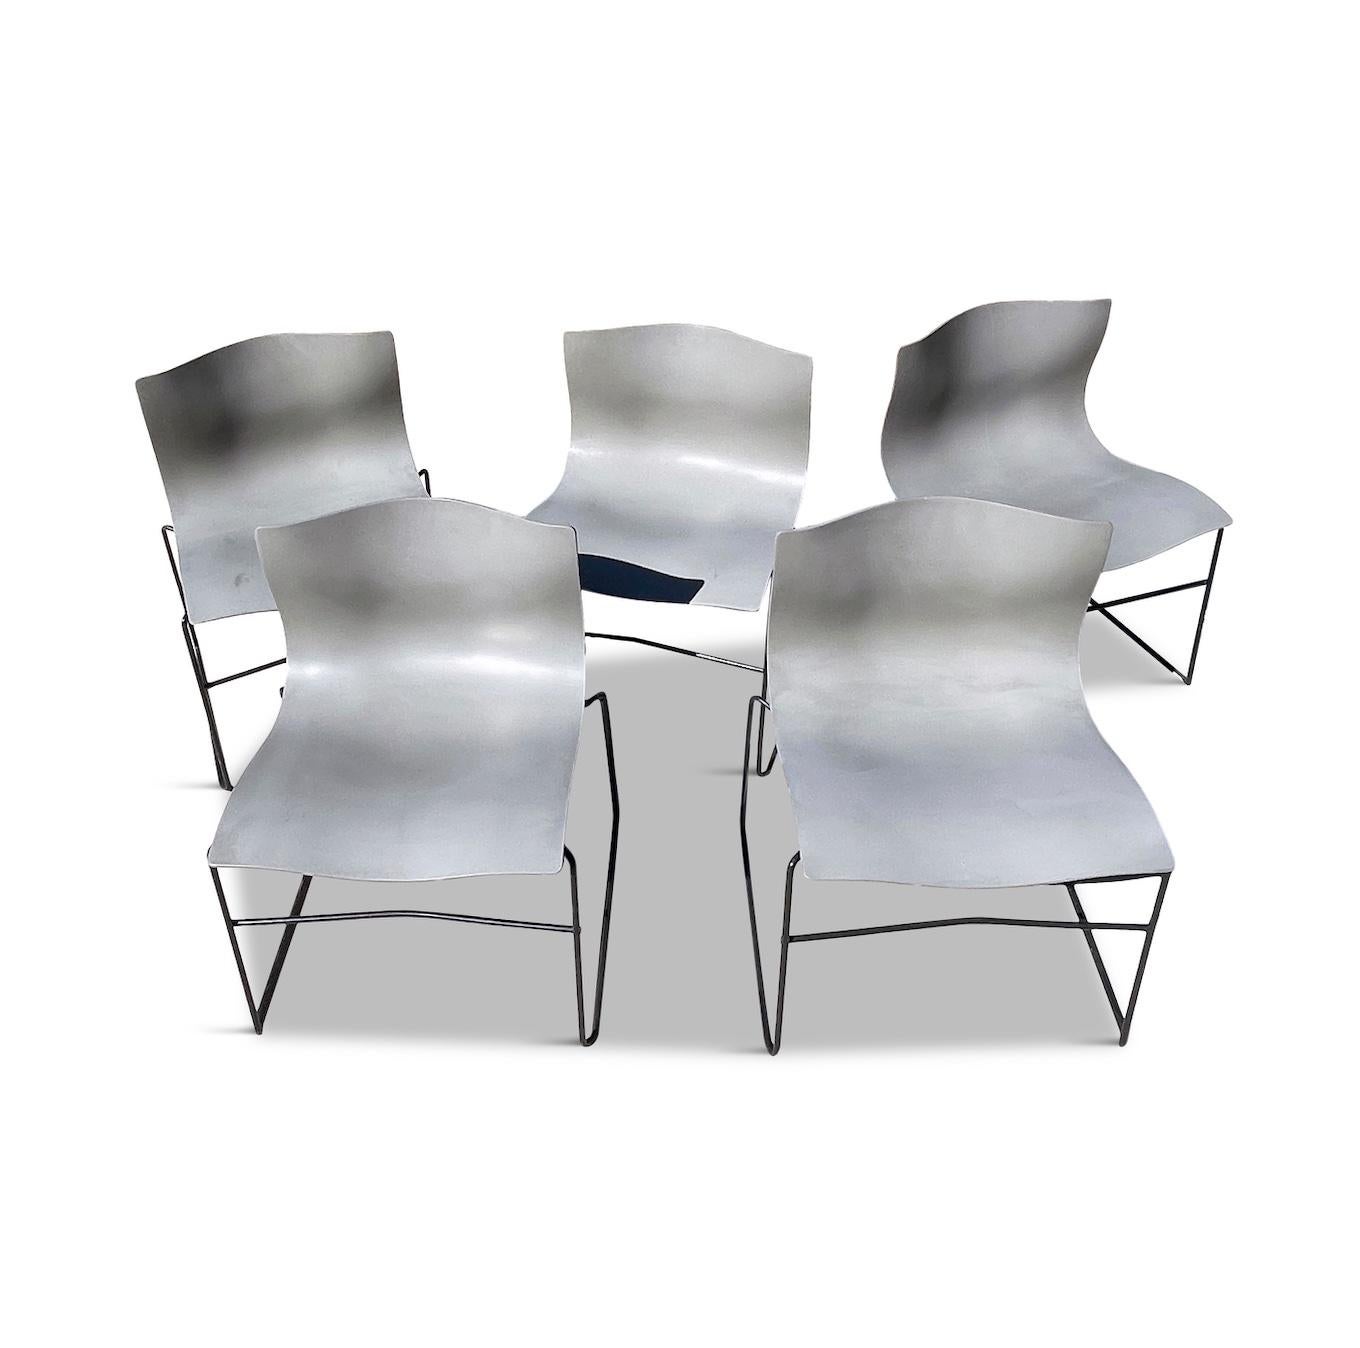 Post-Modern Set of 5 Grey Handkerchief Chairs by Lella and Massimo Vignelli for Knoll